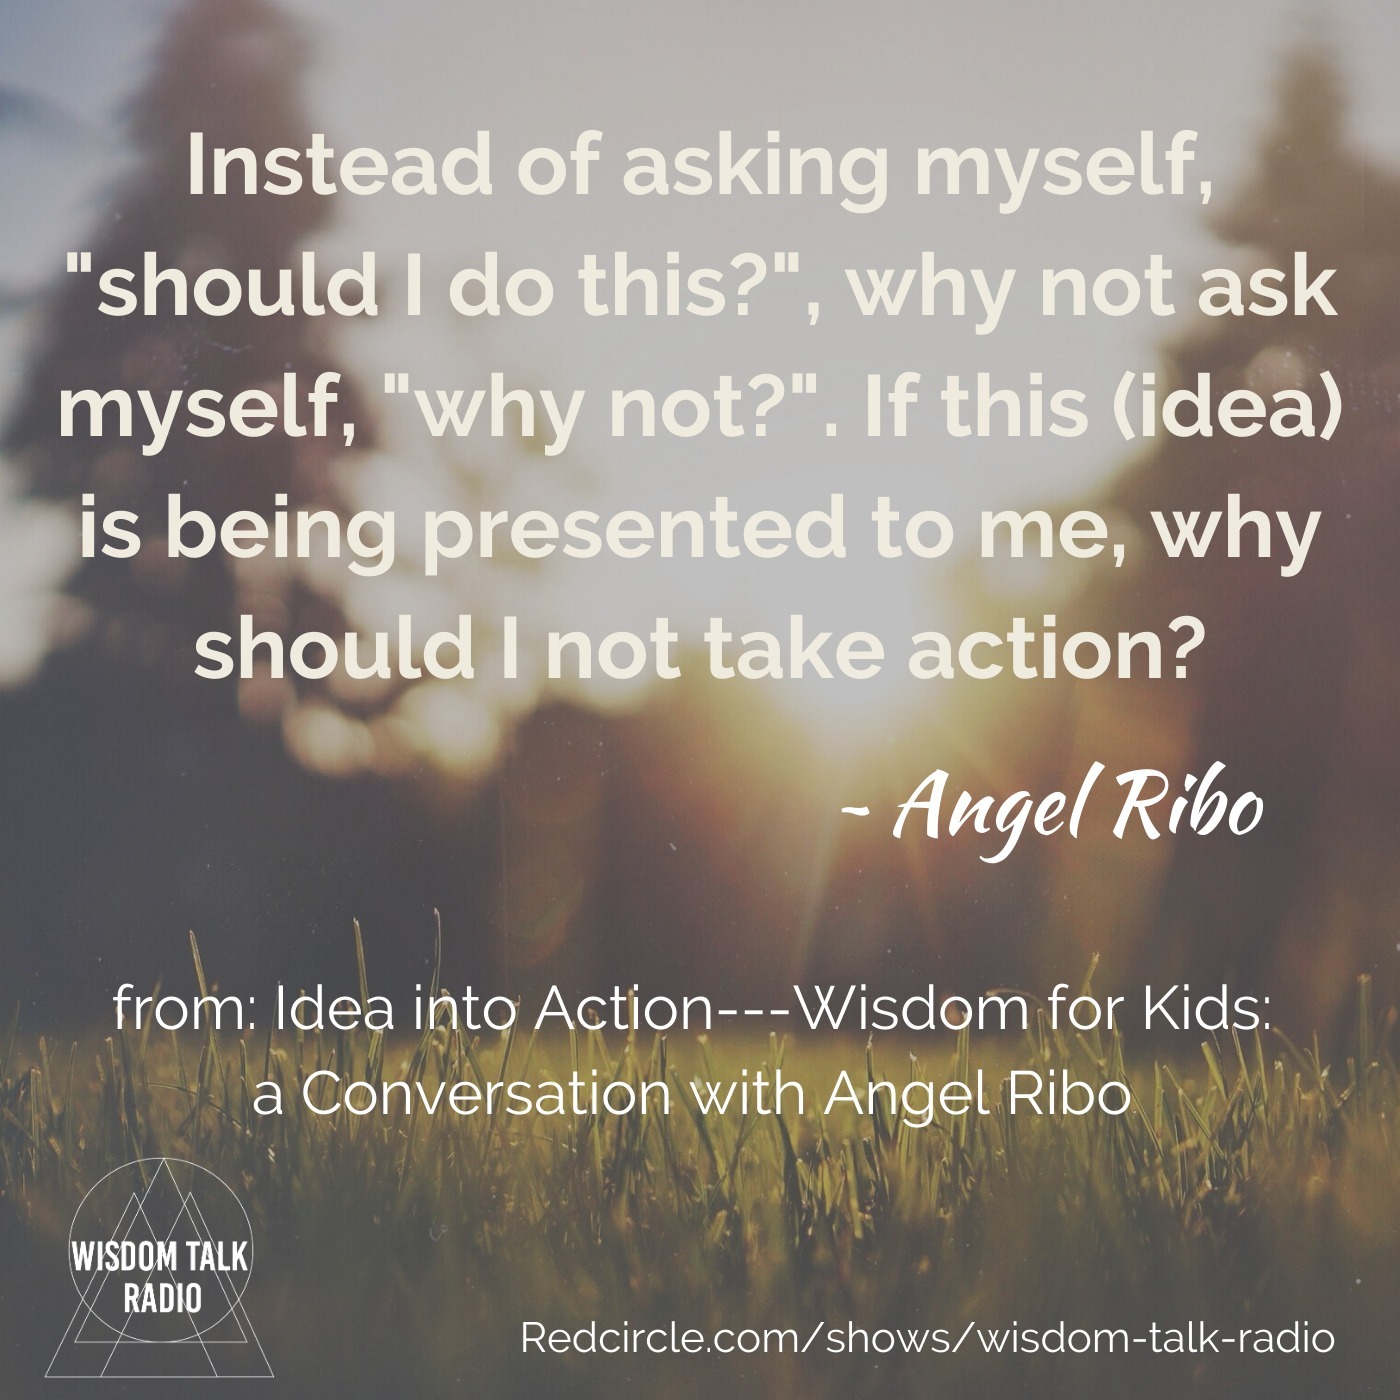 Idea into Action, Wisdom for Kids:  a Conversation with Angel Ribo